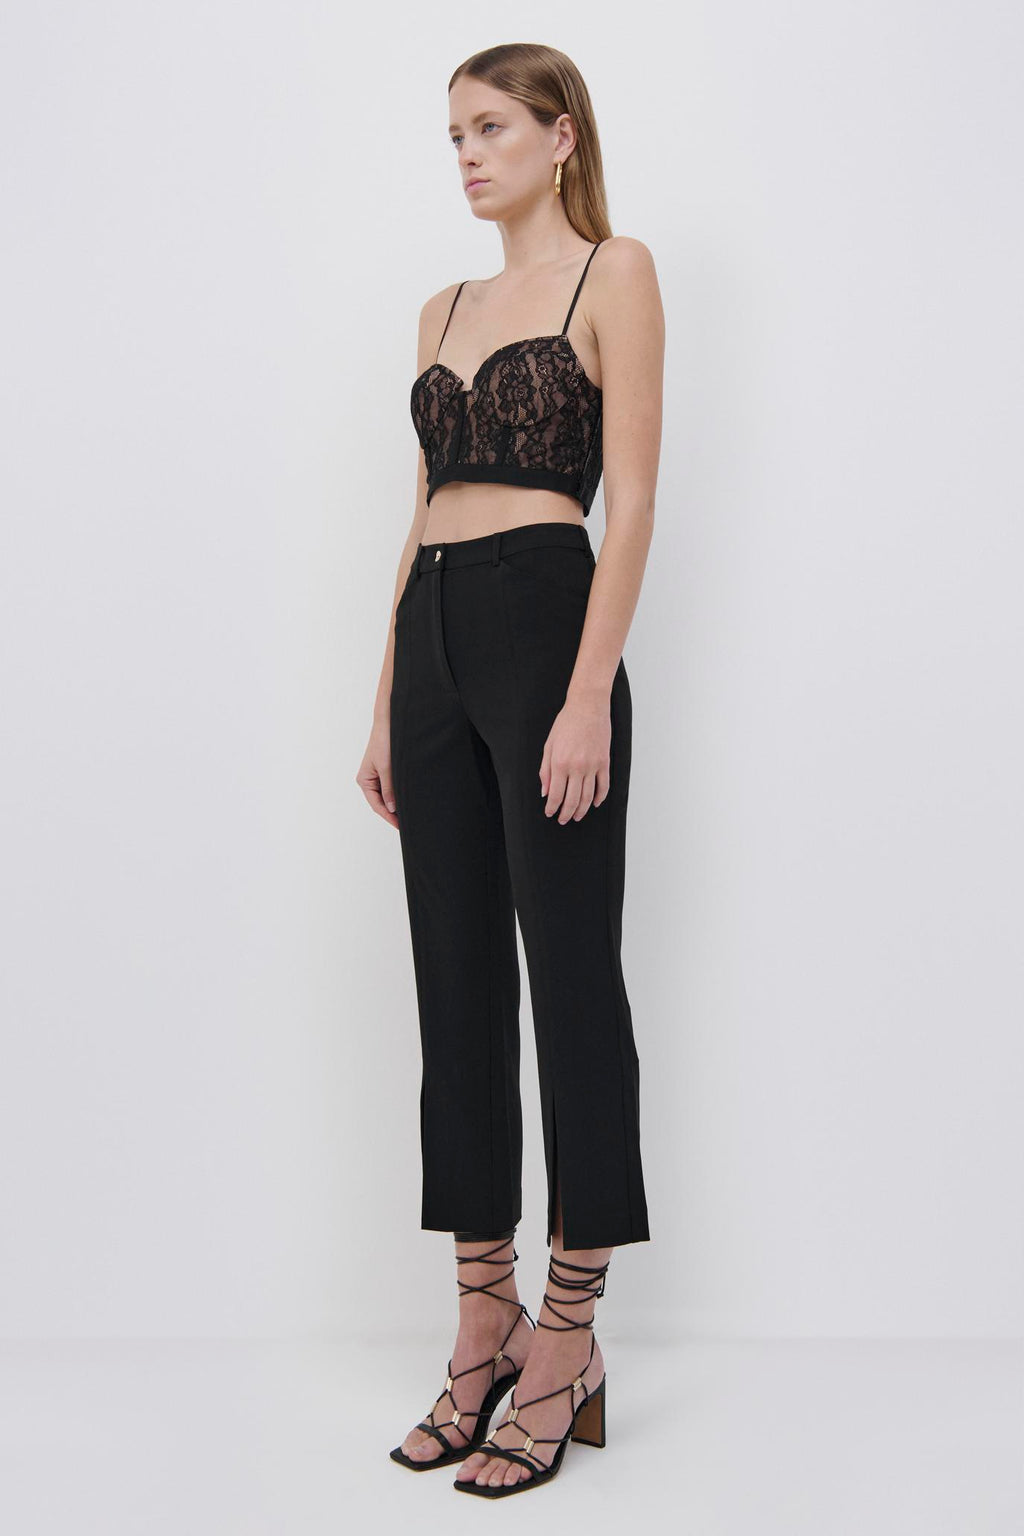 Shirley Delicate Lace Bustier Top